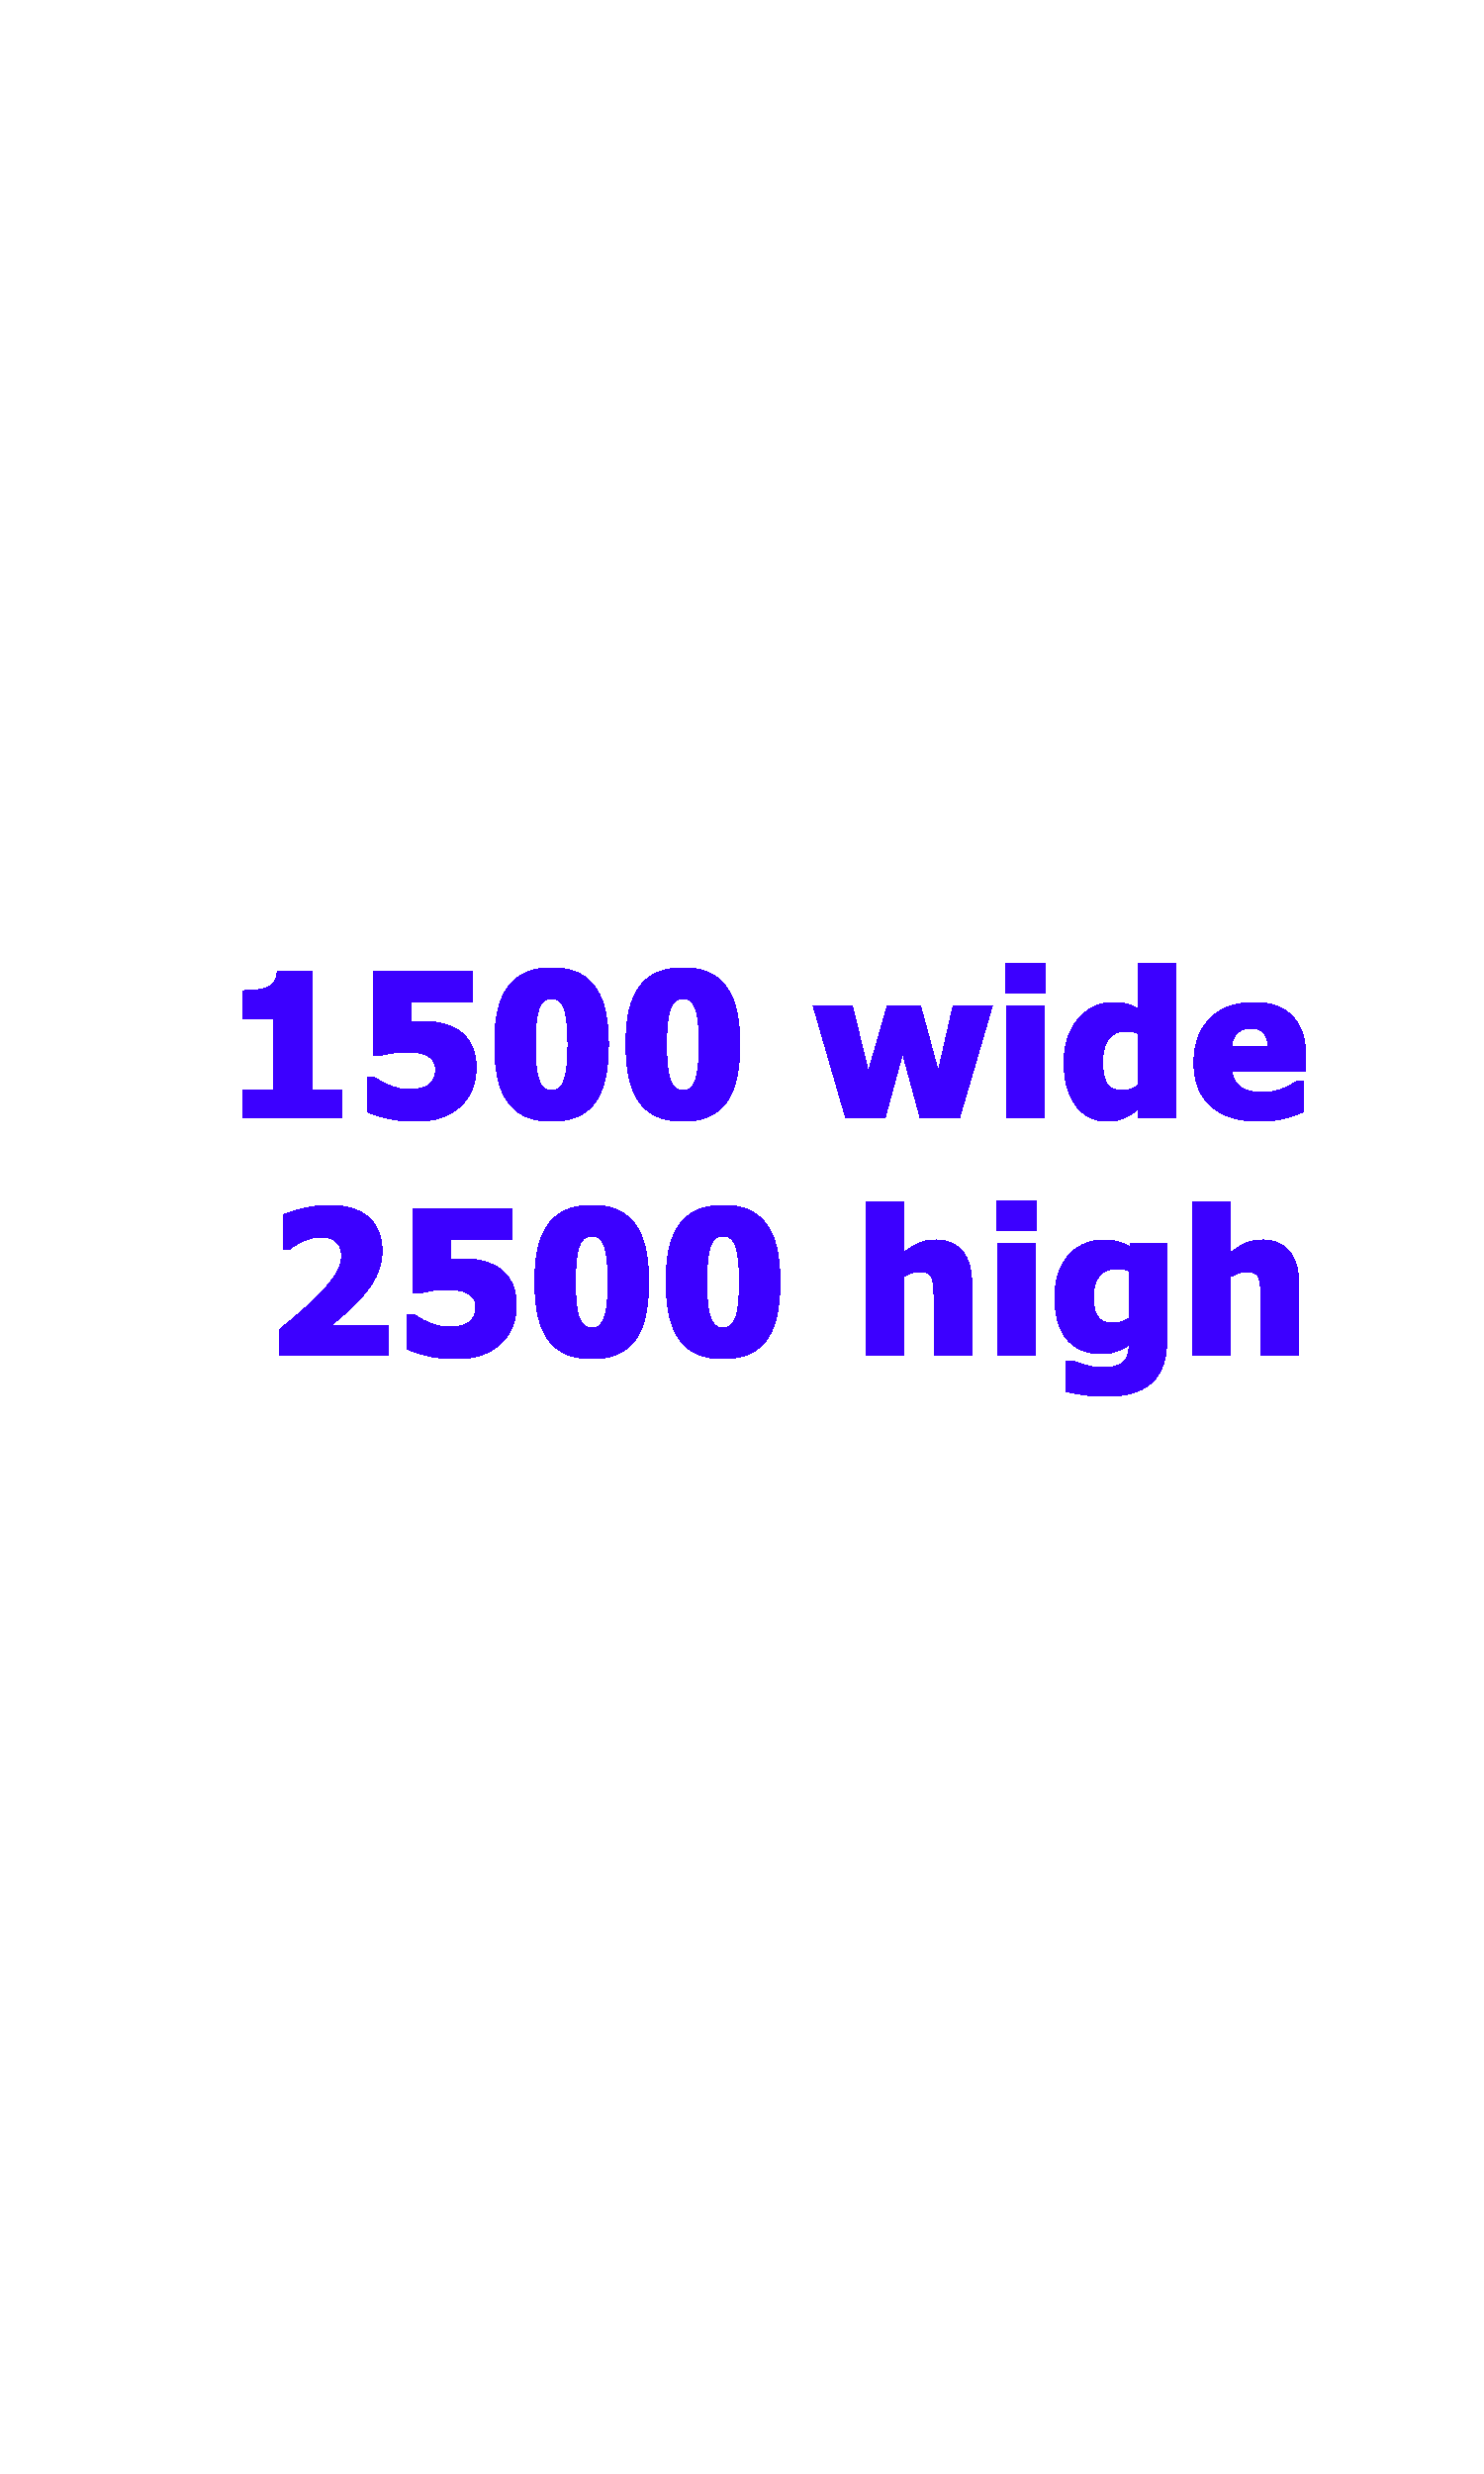 1500_wide_2500_high.png